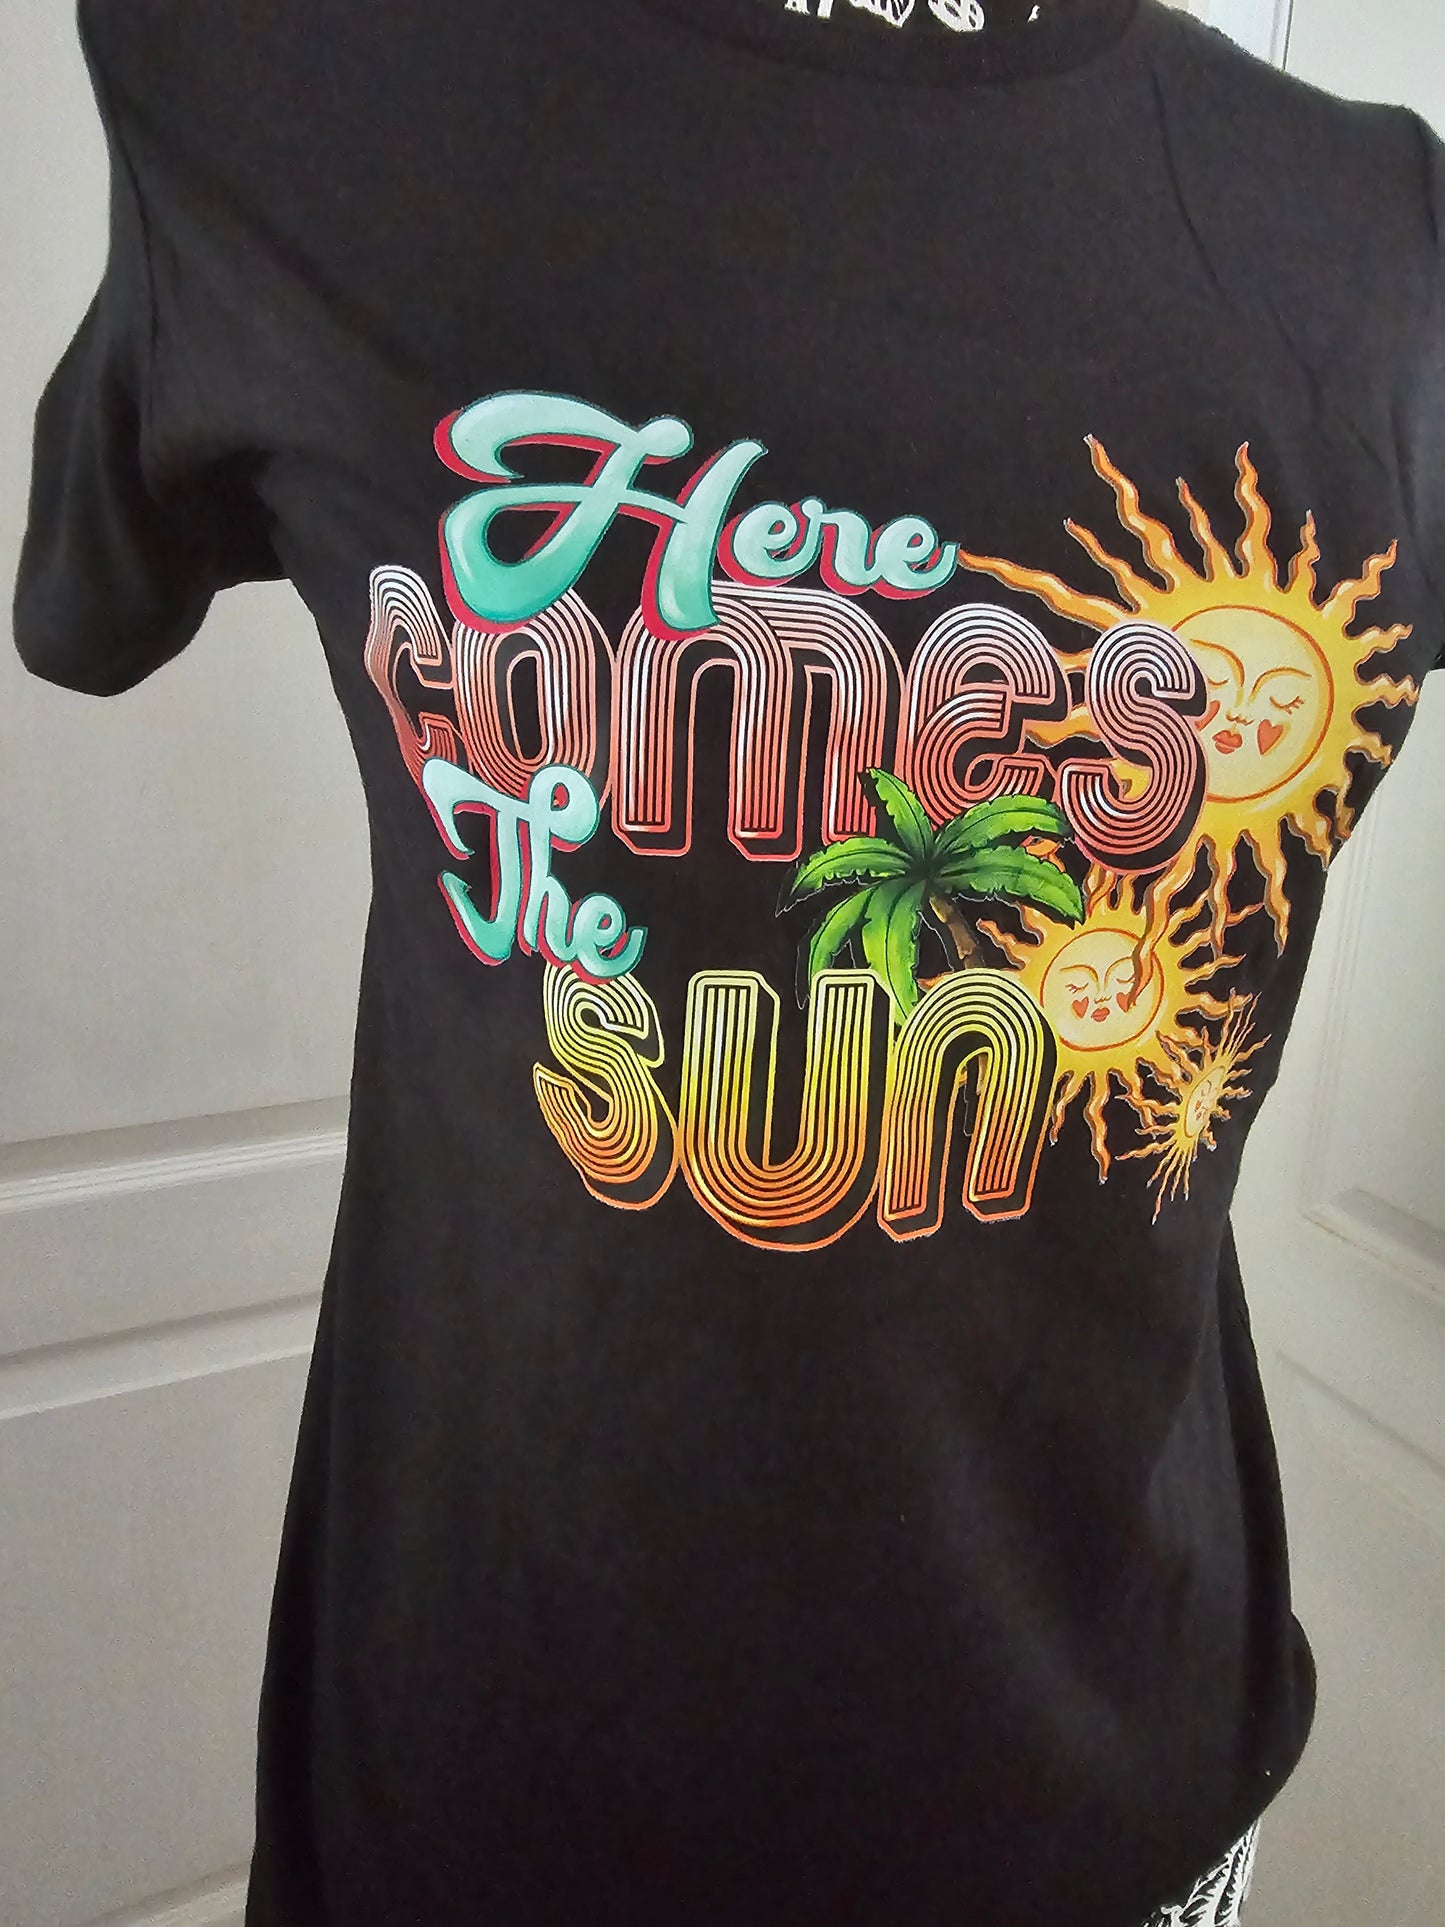 Here Comes The Sun Handmade Graphic T Shirt